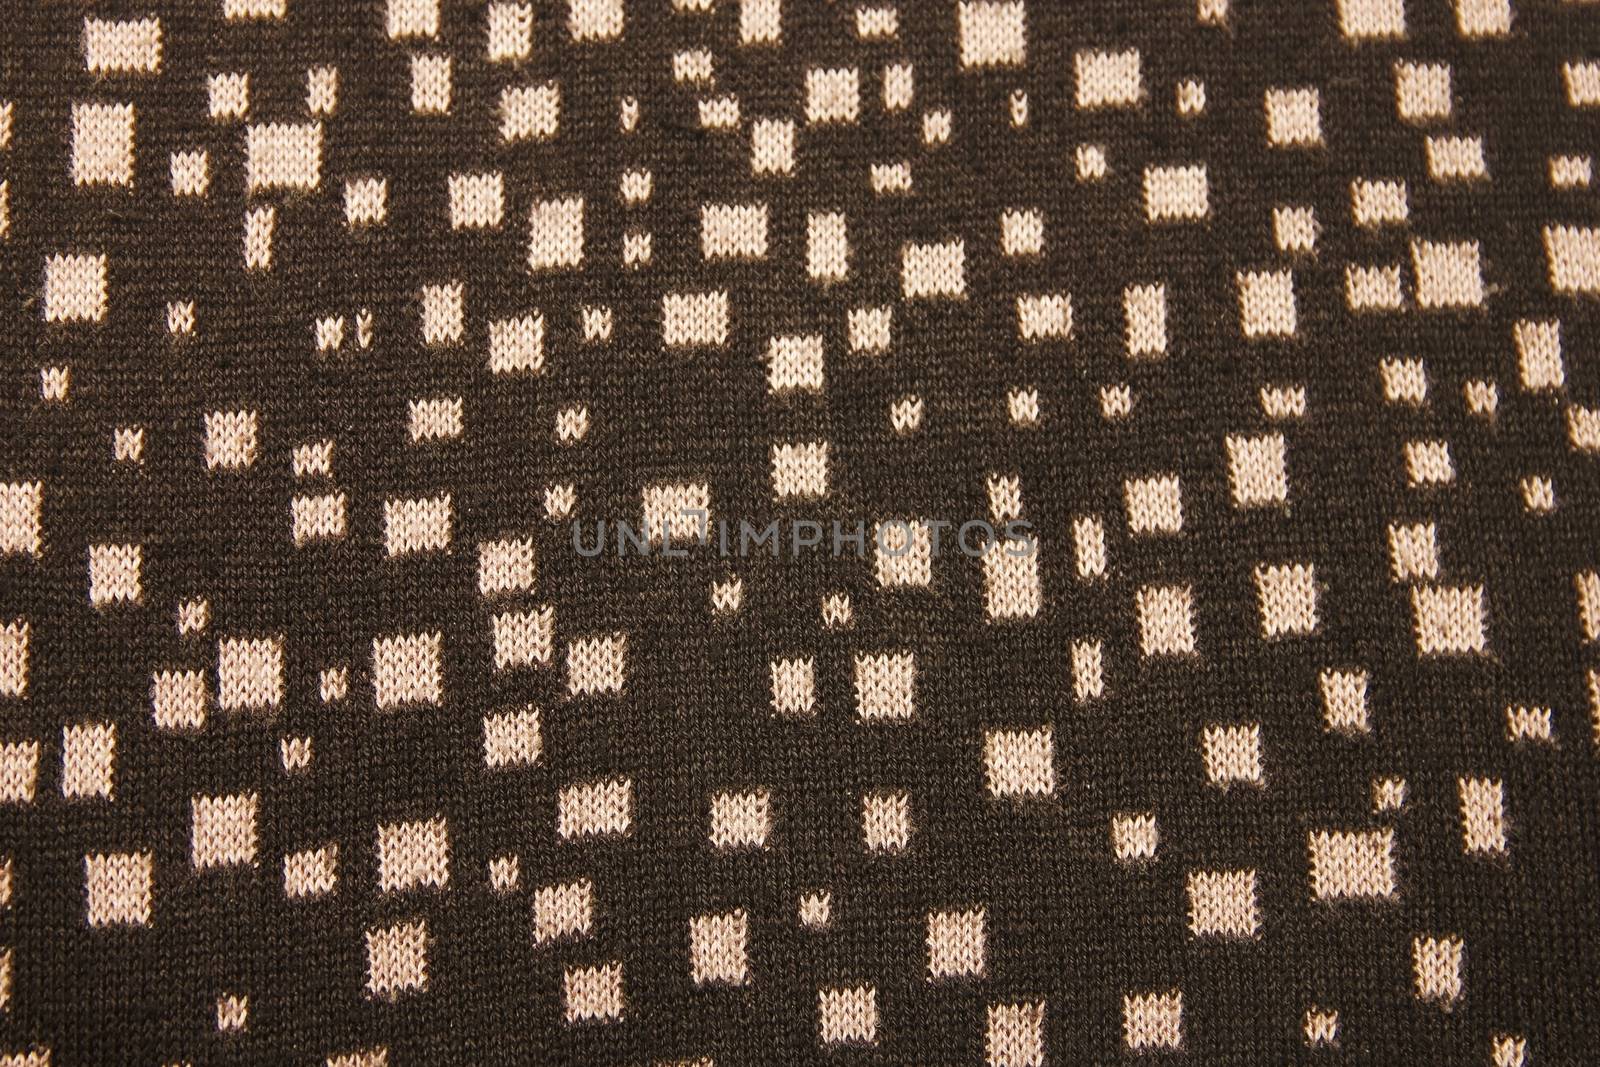 Ornament in black knitted wool knitted warm clothes for the winter fabric texture background